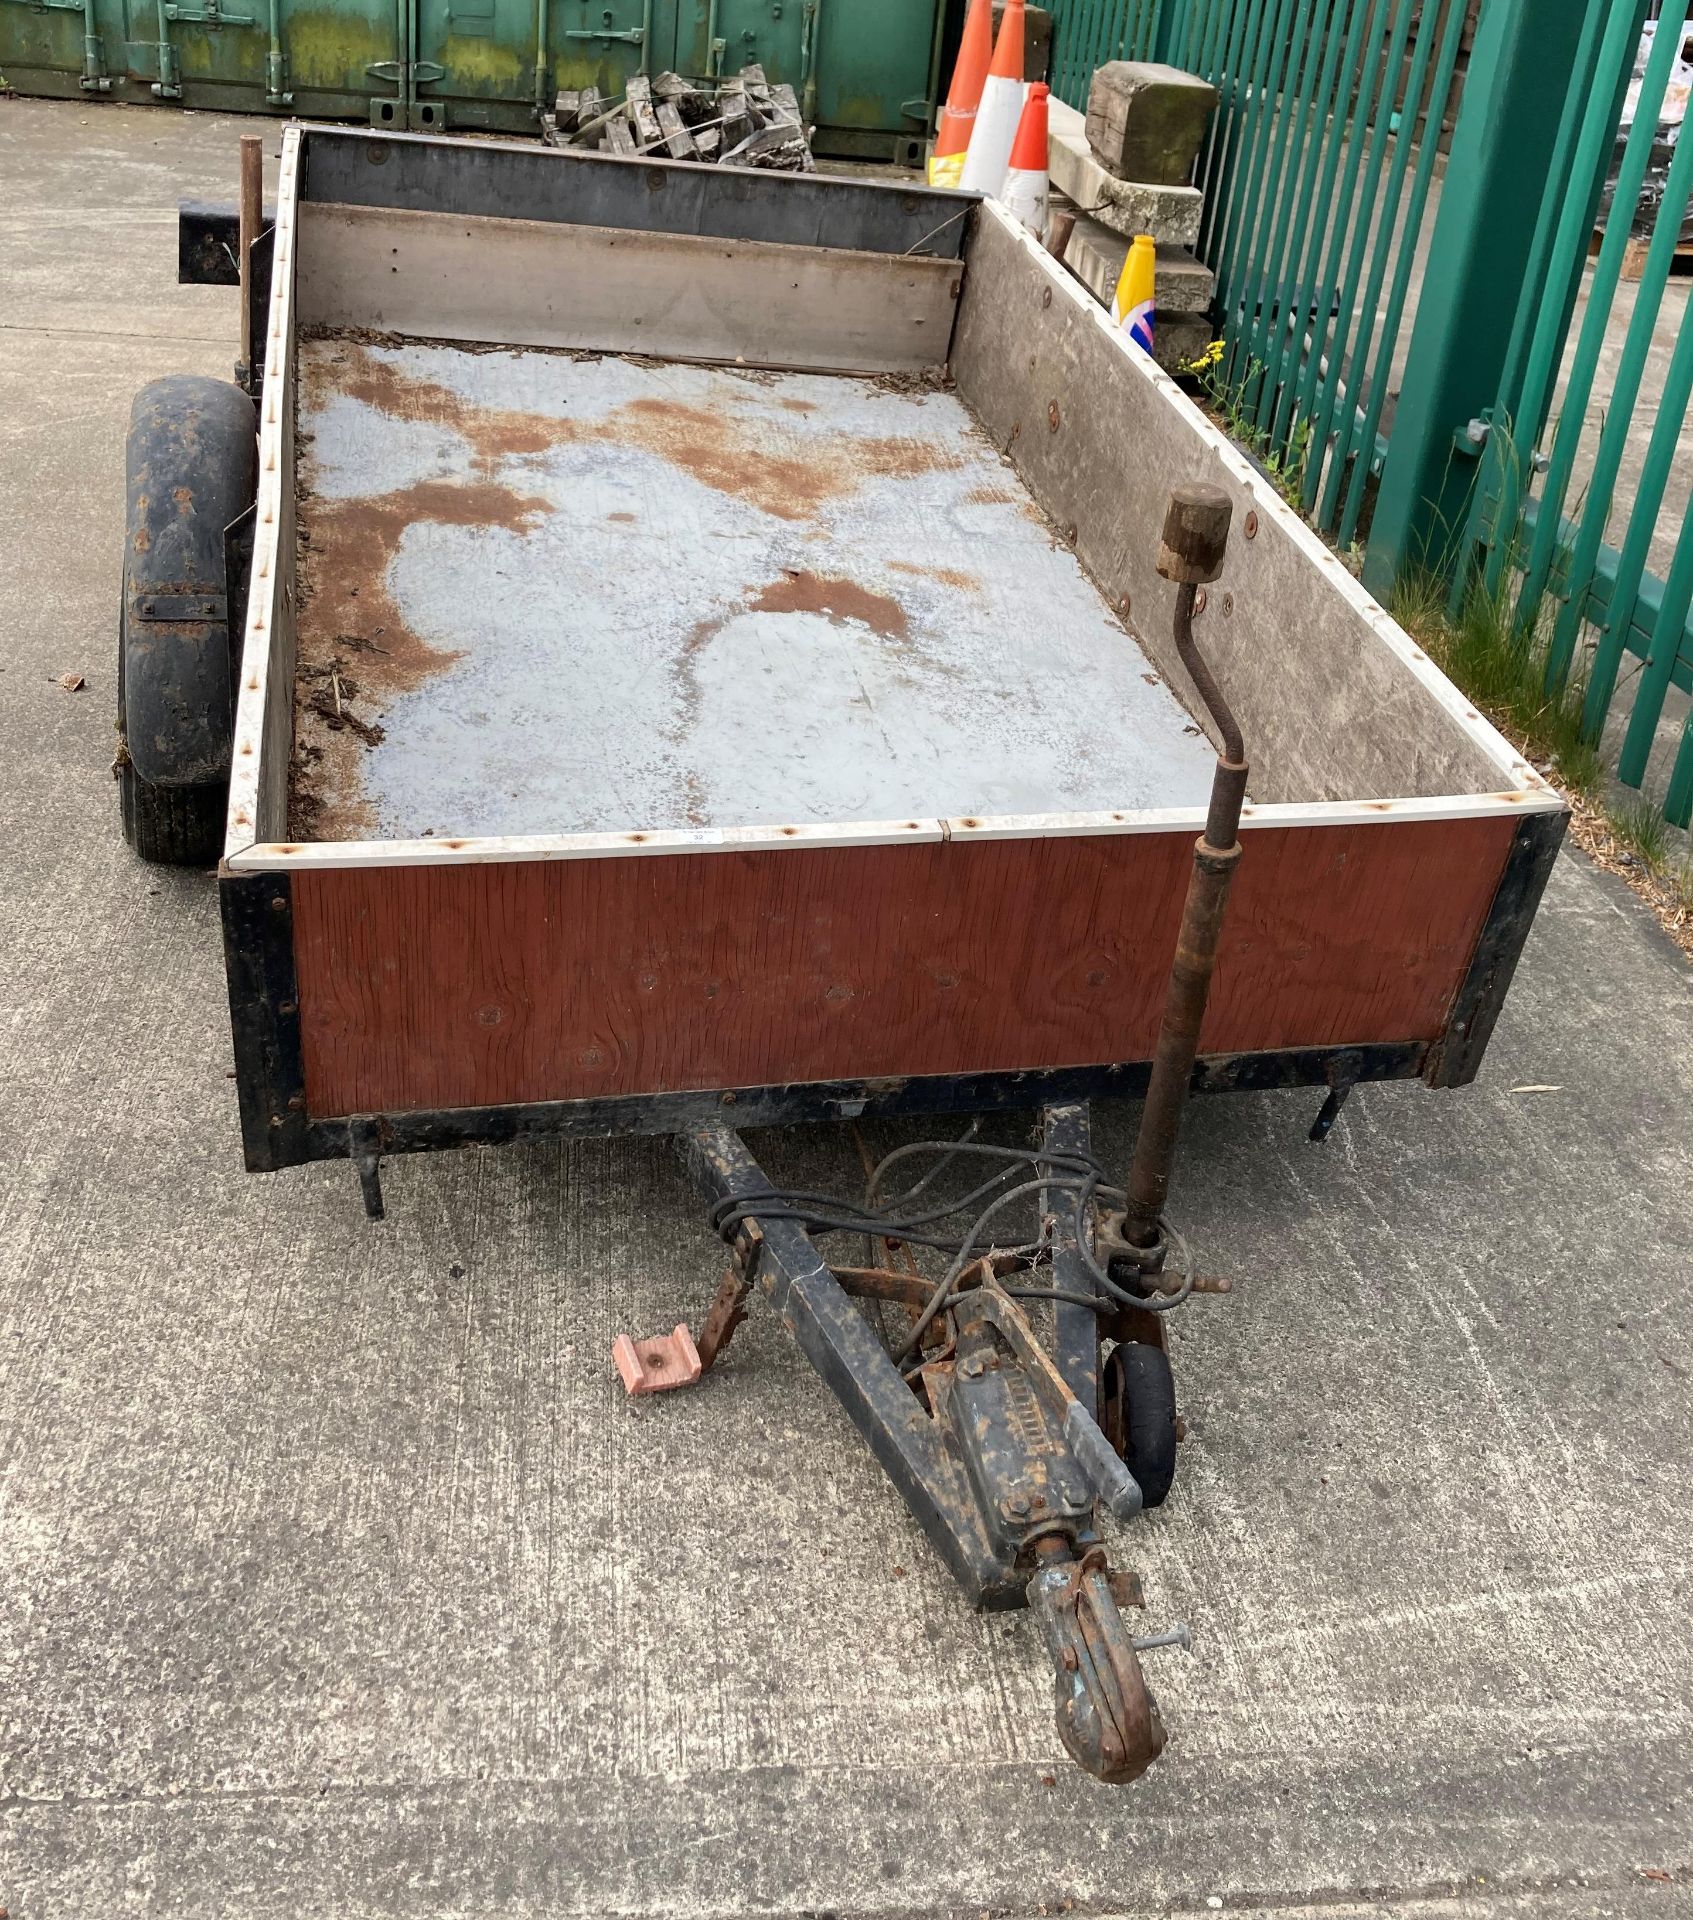 A metal framed single axle trailer with wood sides, 120cm x 200cm x 34cm deep - rusty condition, - Image 2 of 3